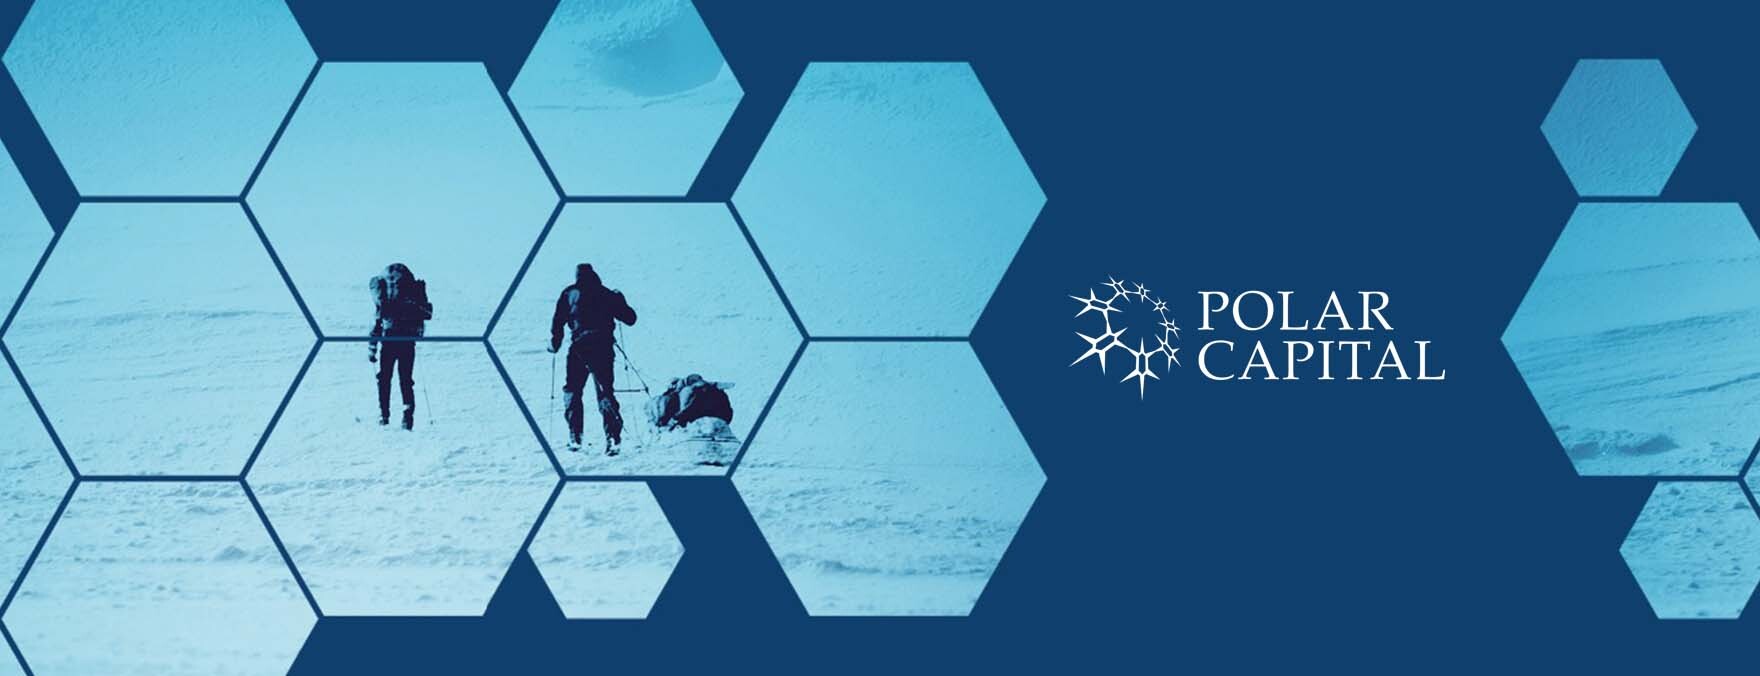 On a blue background, a collage of an image (two men holding skating material walking in the snow) is shown.